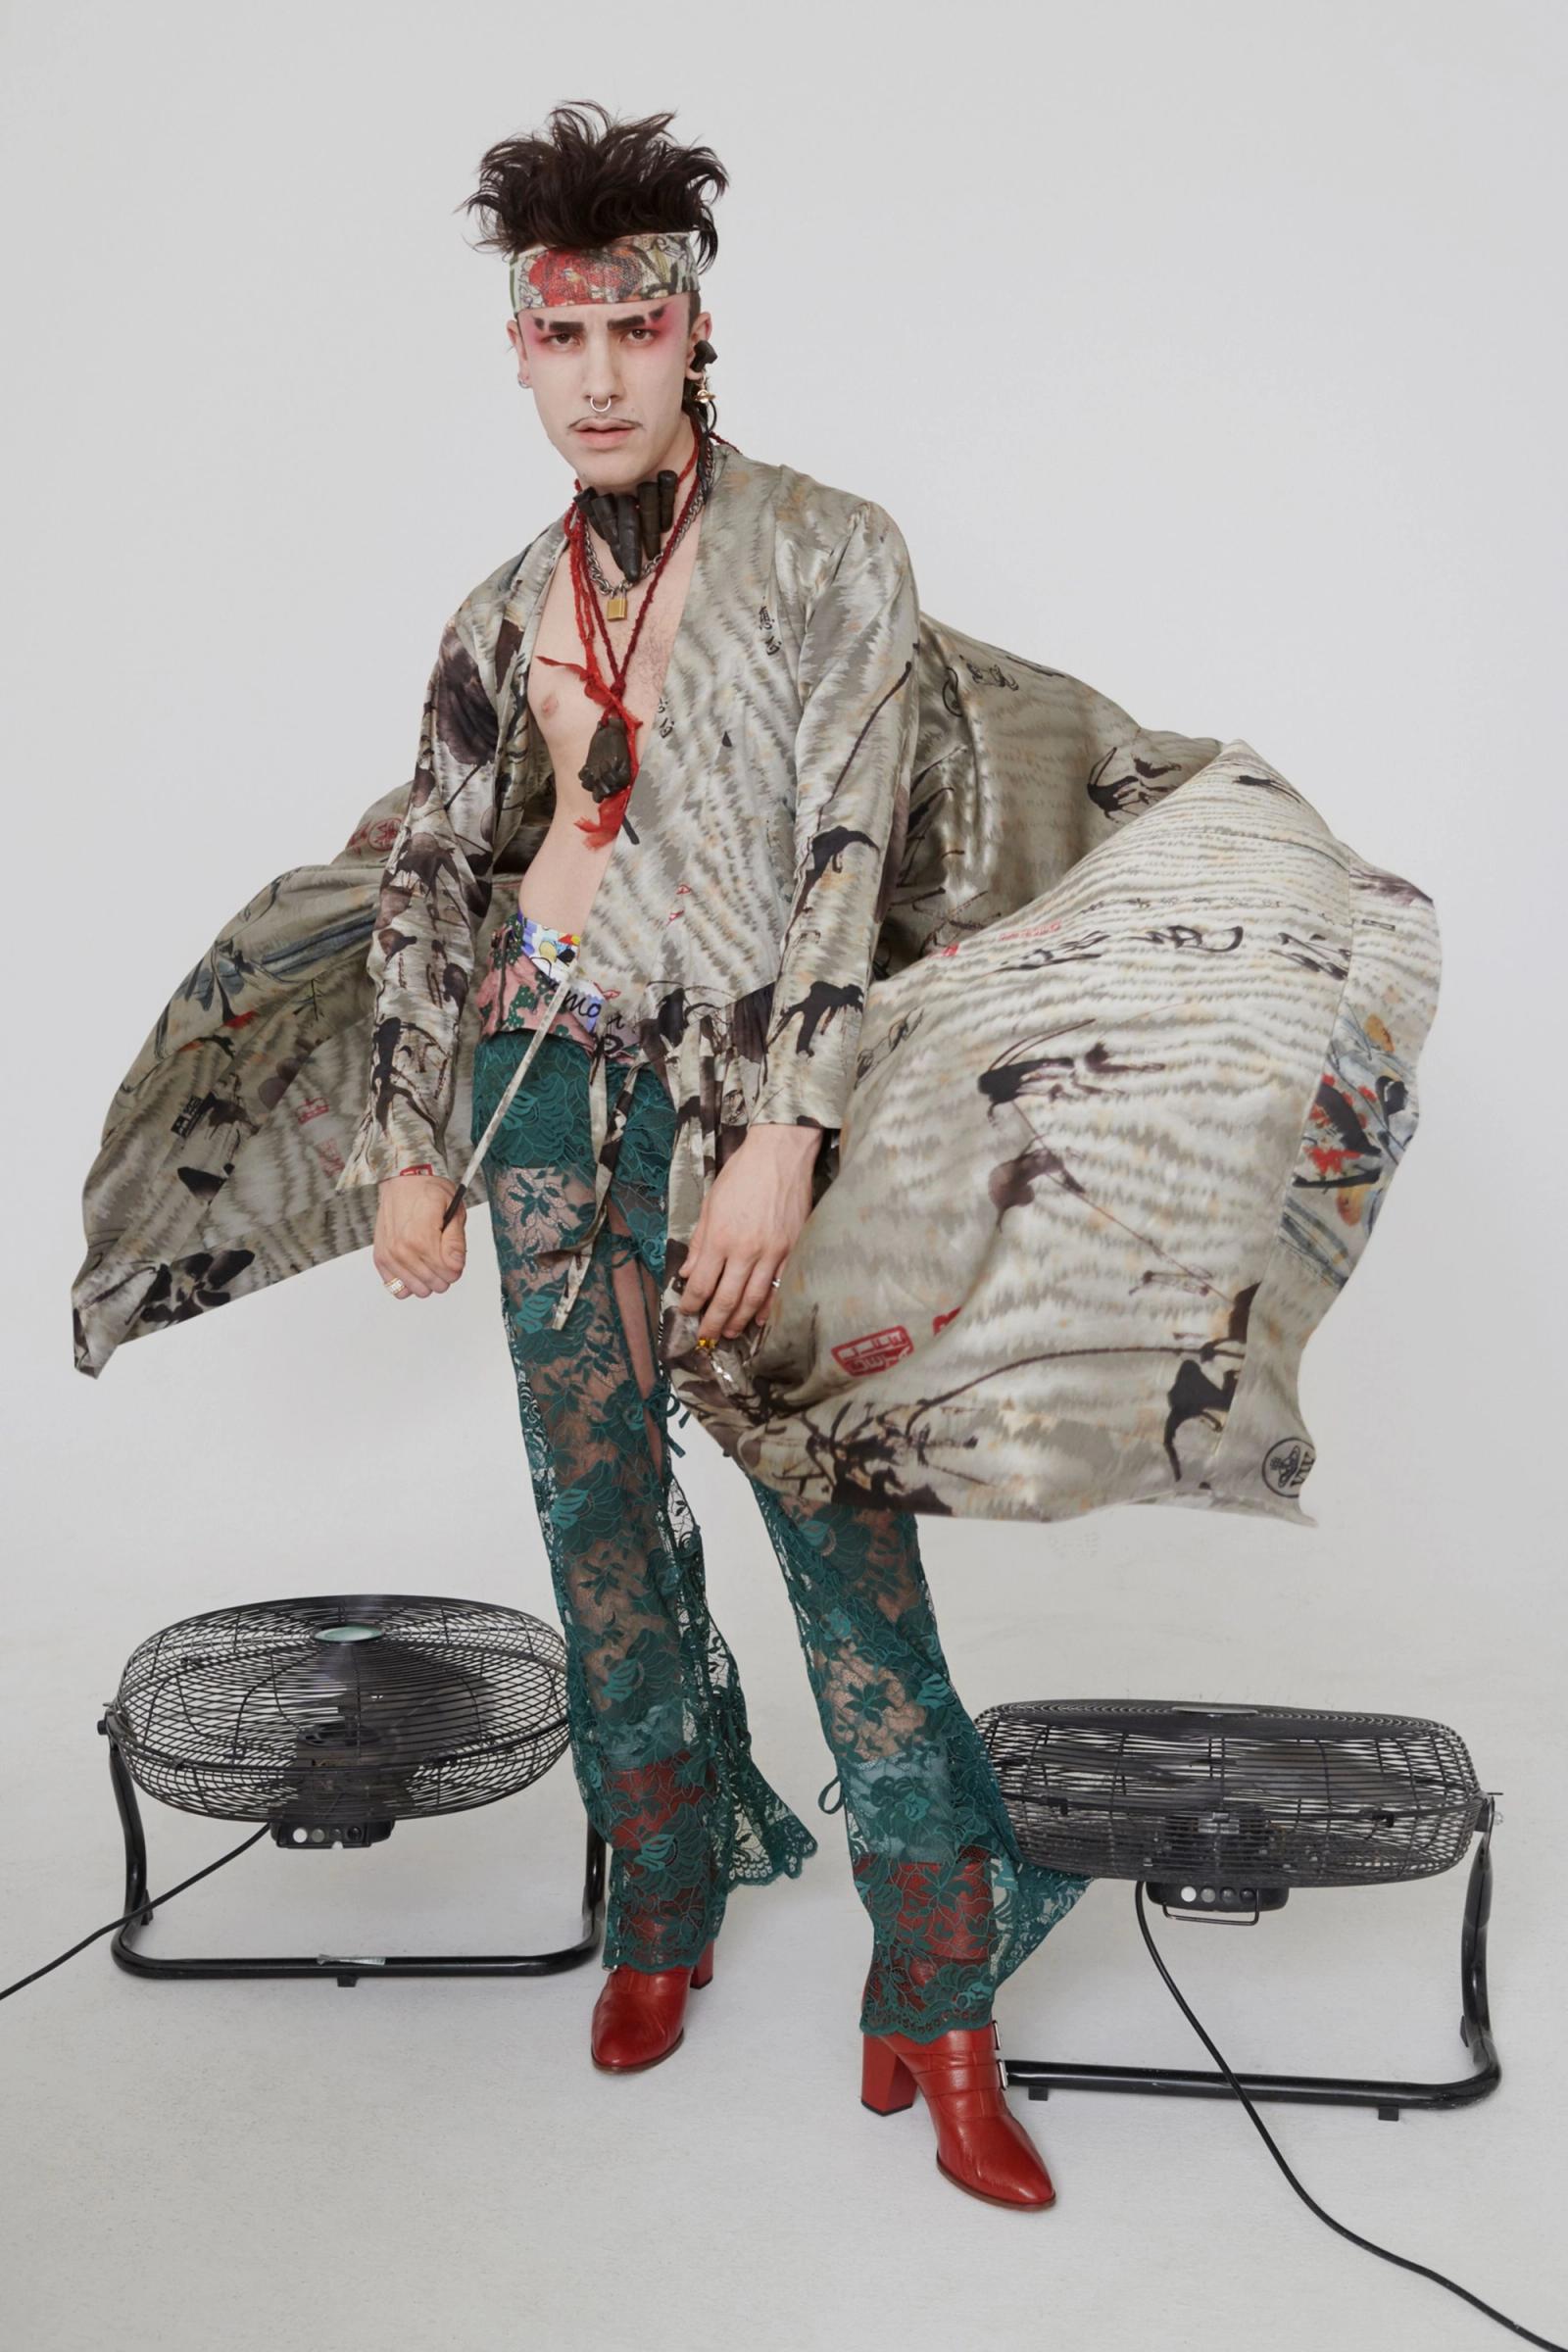 Vivienne Westwood S/S 2019 - Paolo Colaiocco styled by Sabina Schreder